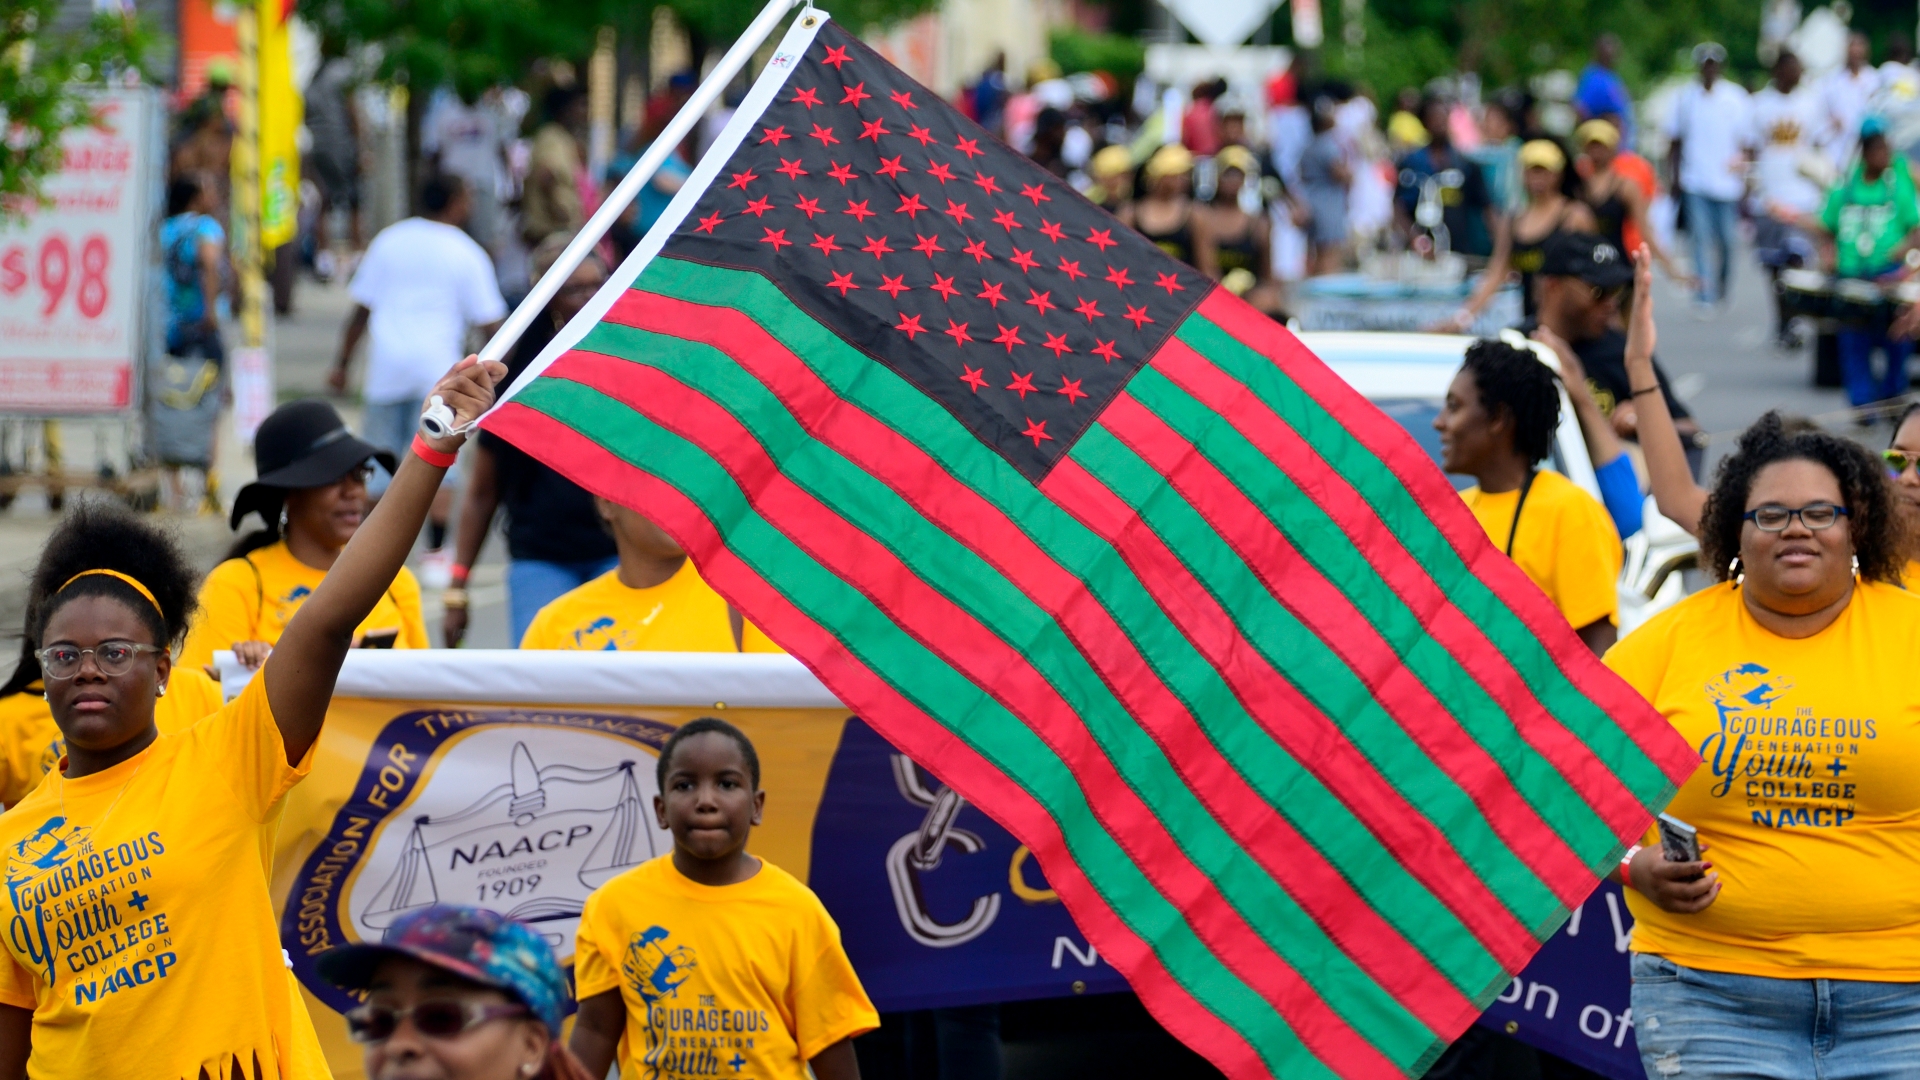 Juneteenth: A day of growth and encouragement of change